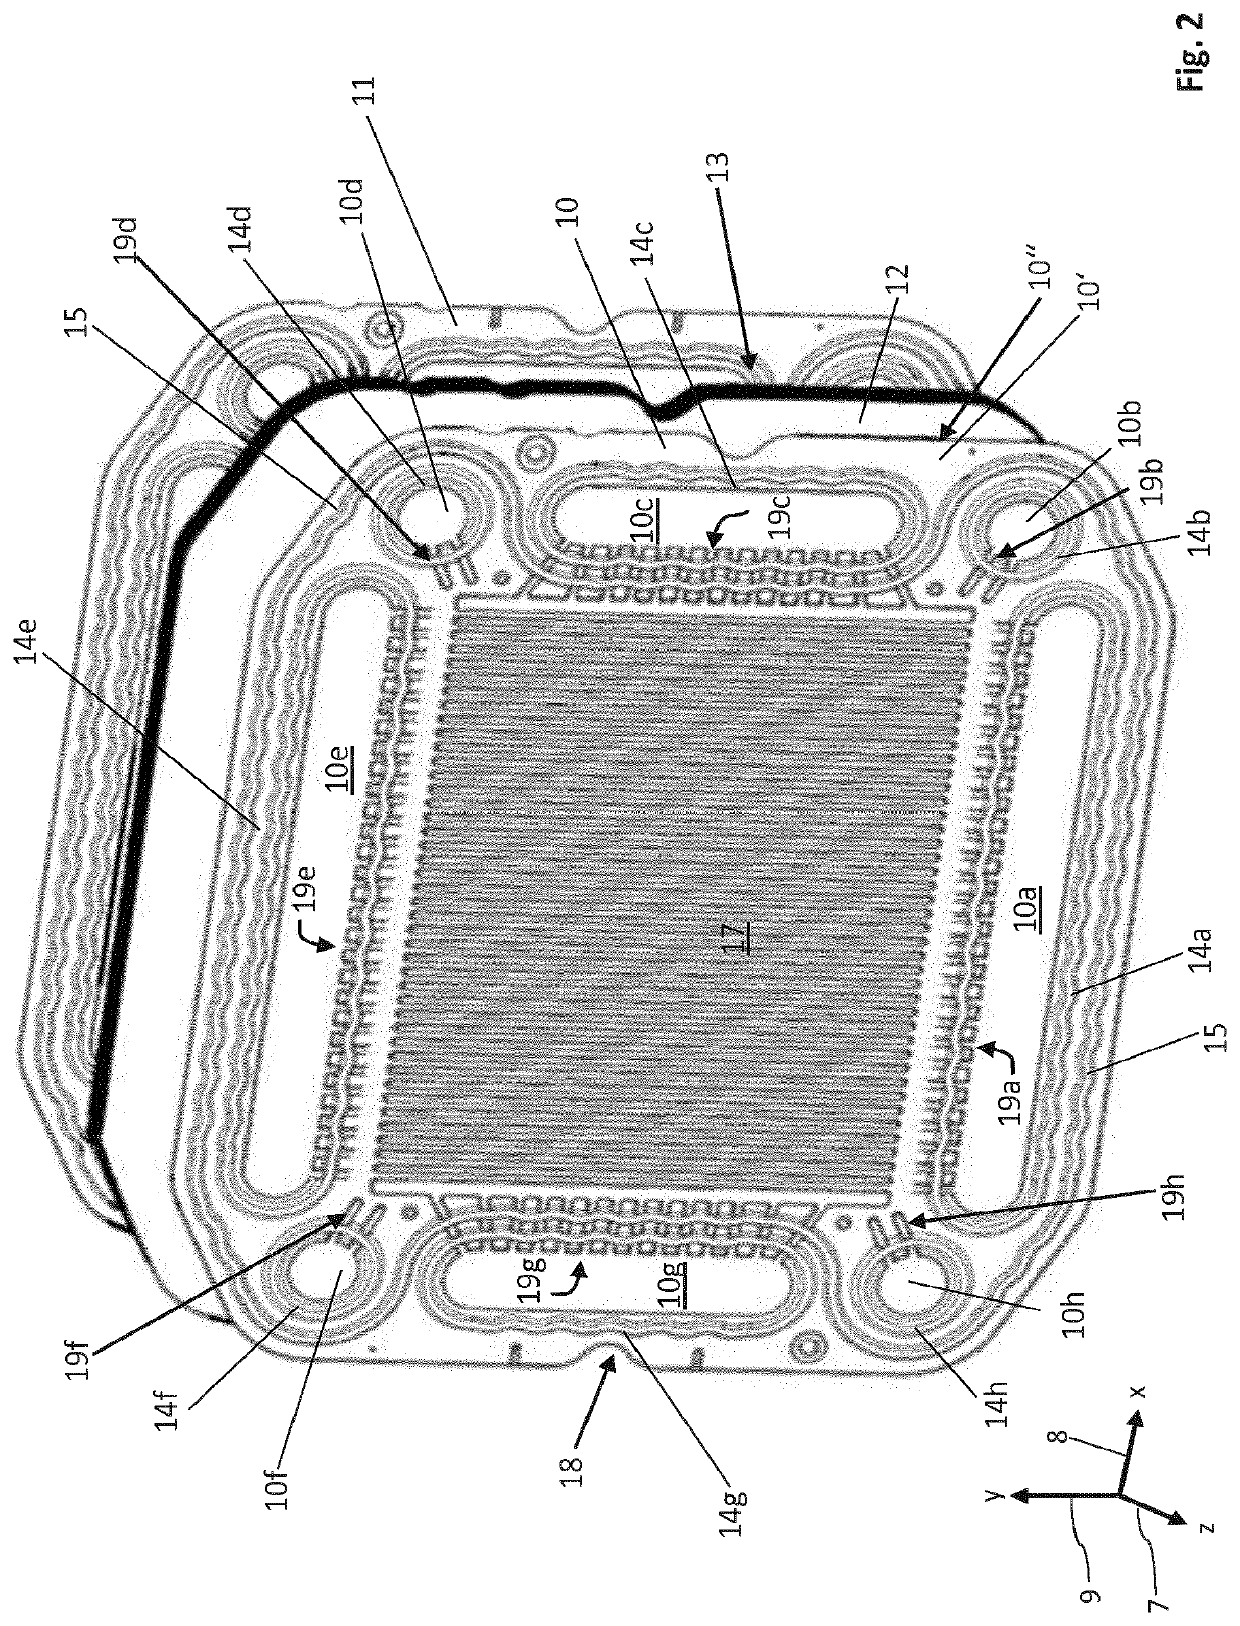 Separator plate for an electrochemical system